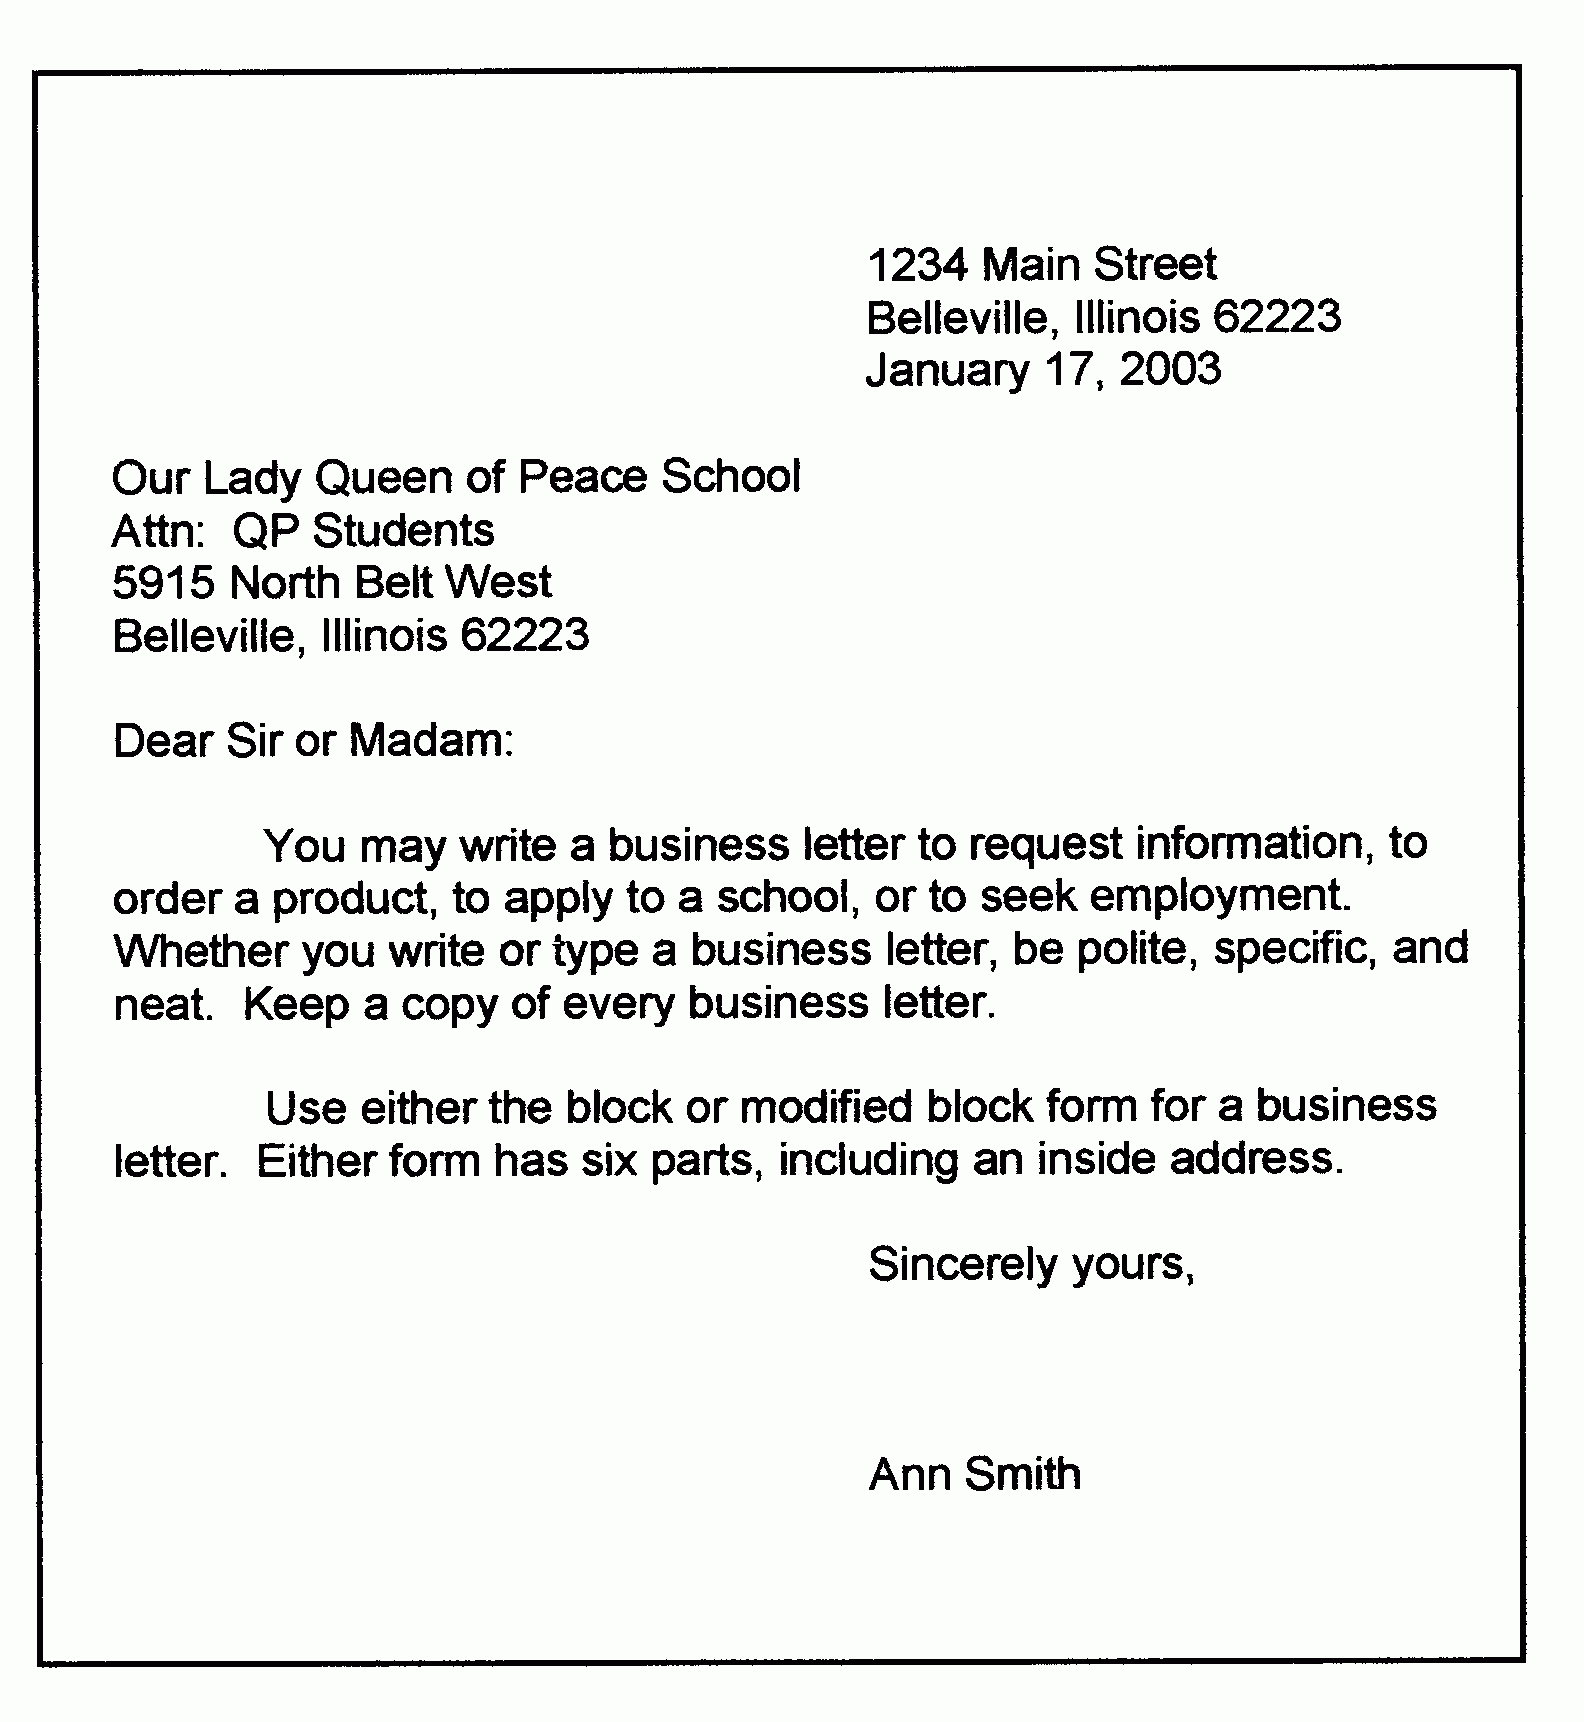 Personal Business Letter Format | Sample Business Letter With Regard To Modified Block Letter Template Word